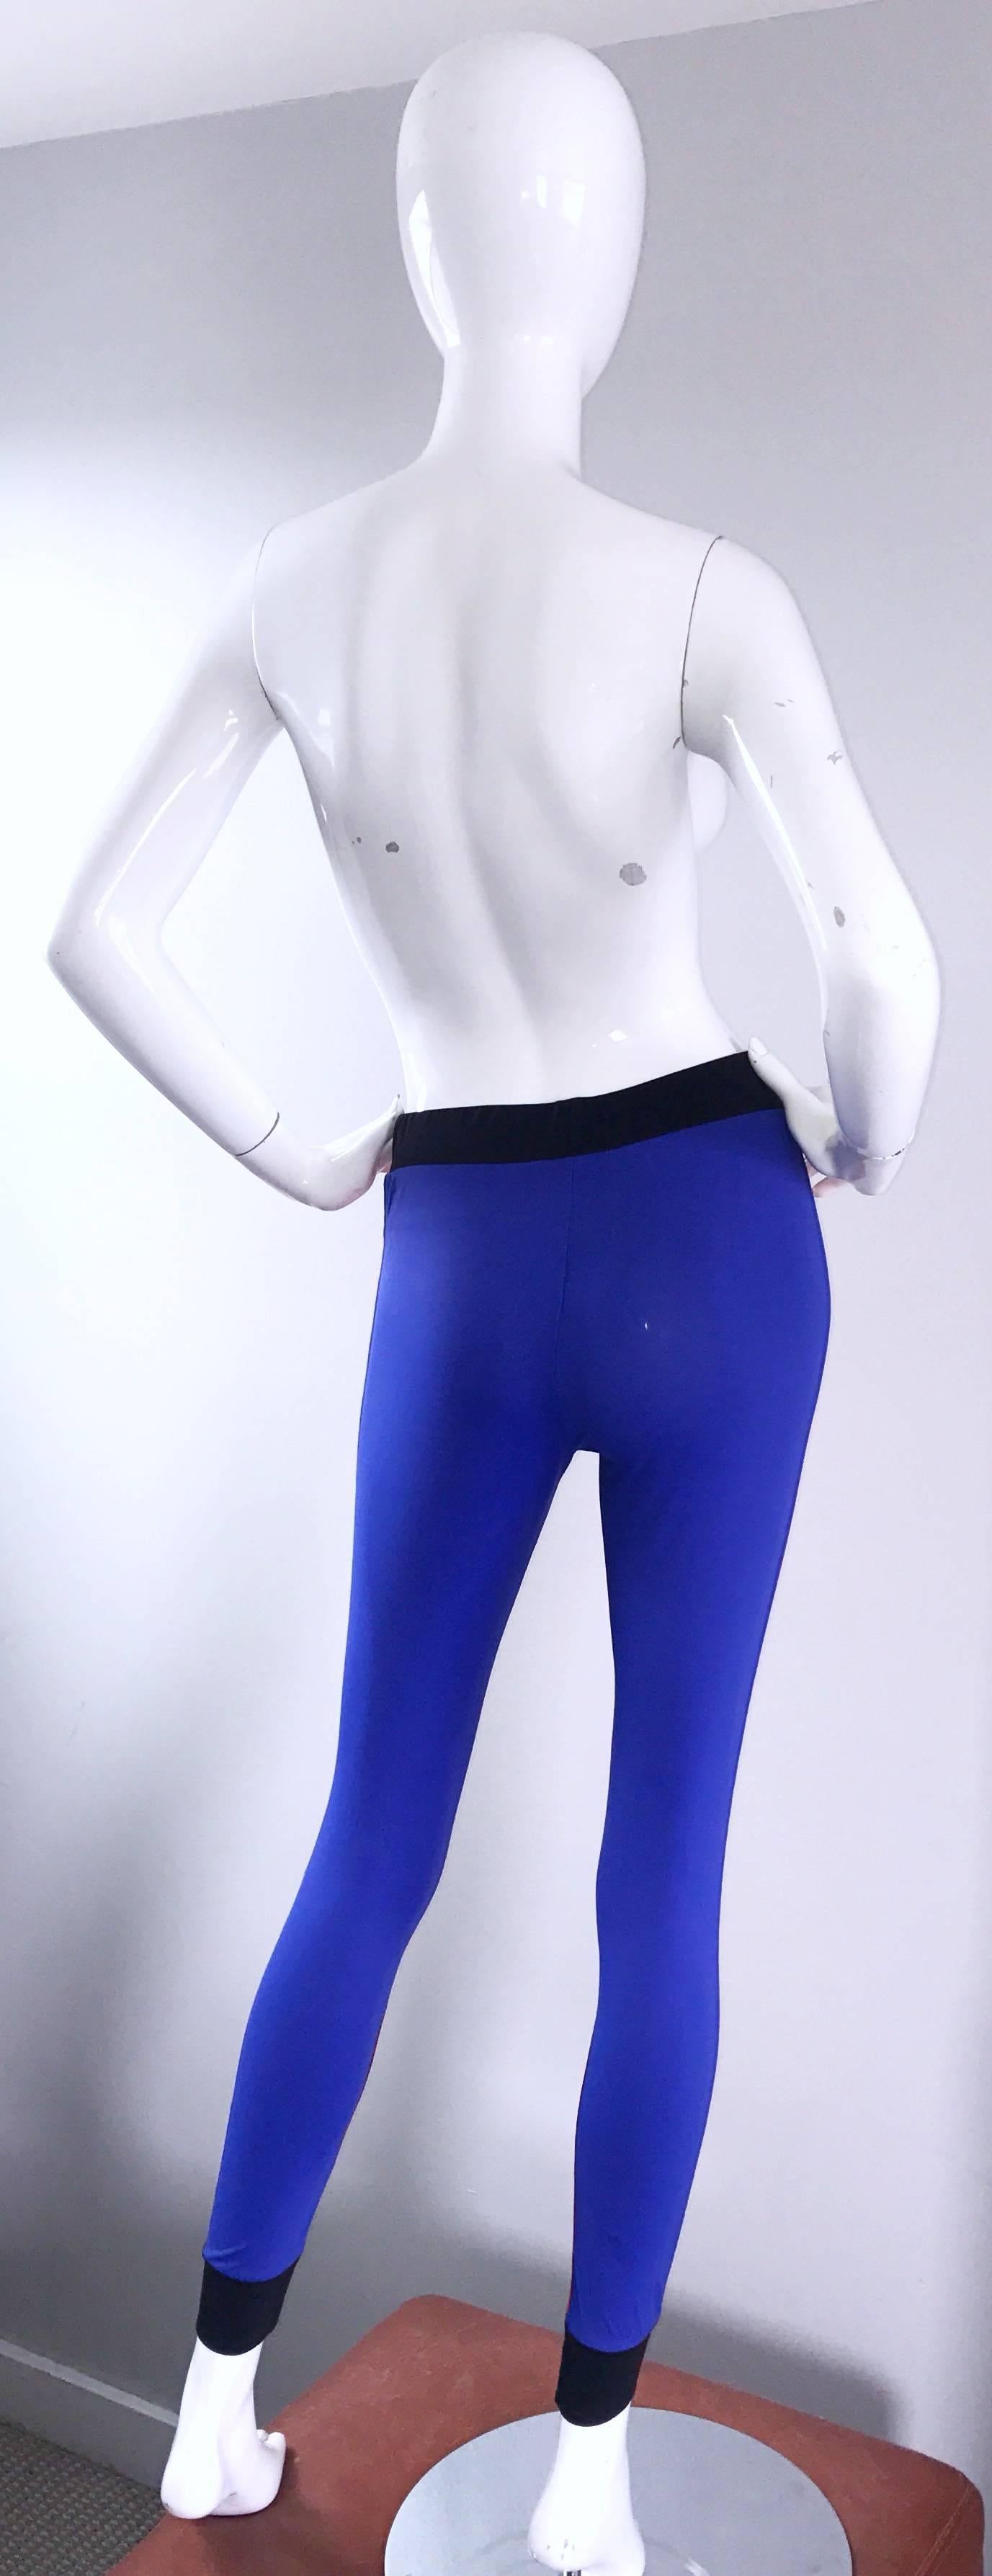 Gianfranco Ferre 1990s Vintage Red and Blue Color Block High Waisted Leggings For Sale 1